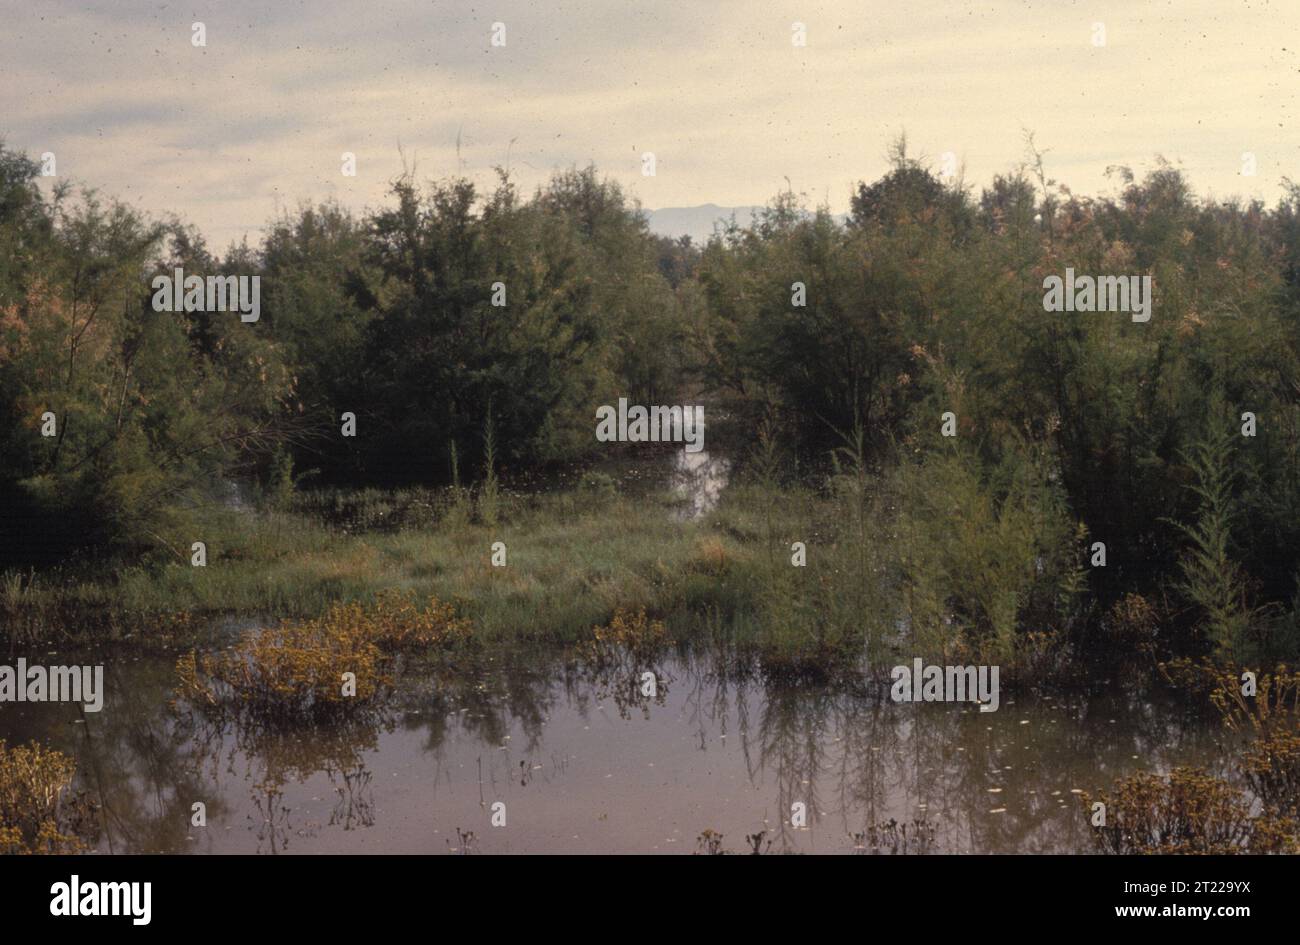 A shot of a salt cedar wetland in New Mexico. Subjects: Wetlands. Location: New Mexico.  . 1998 - 2011. Stock Photo